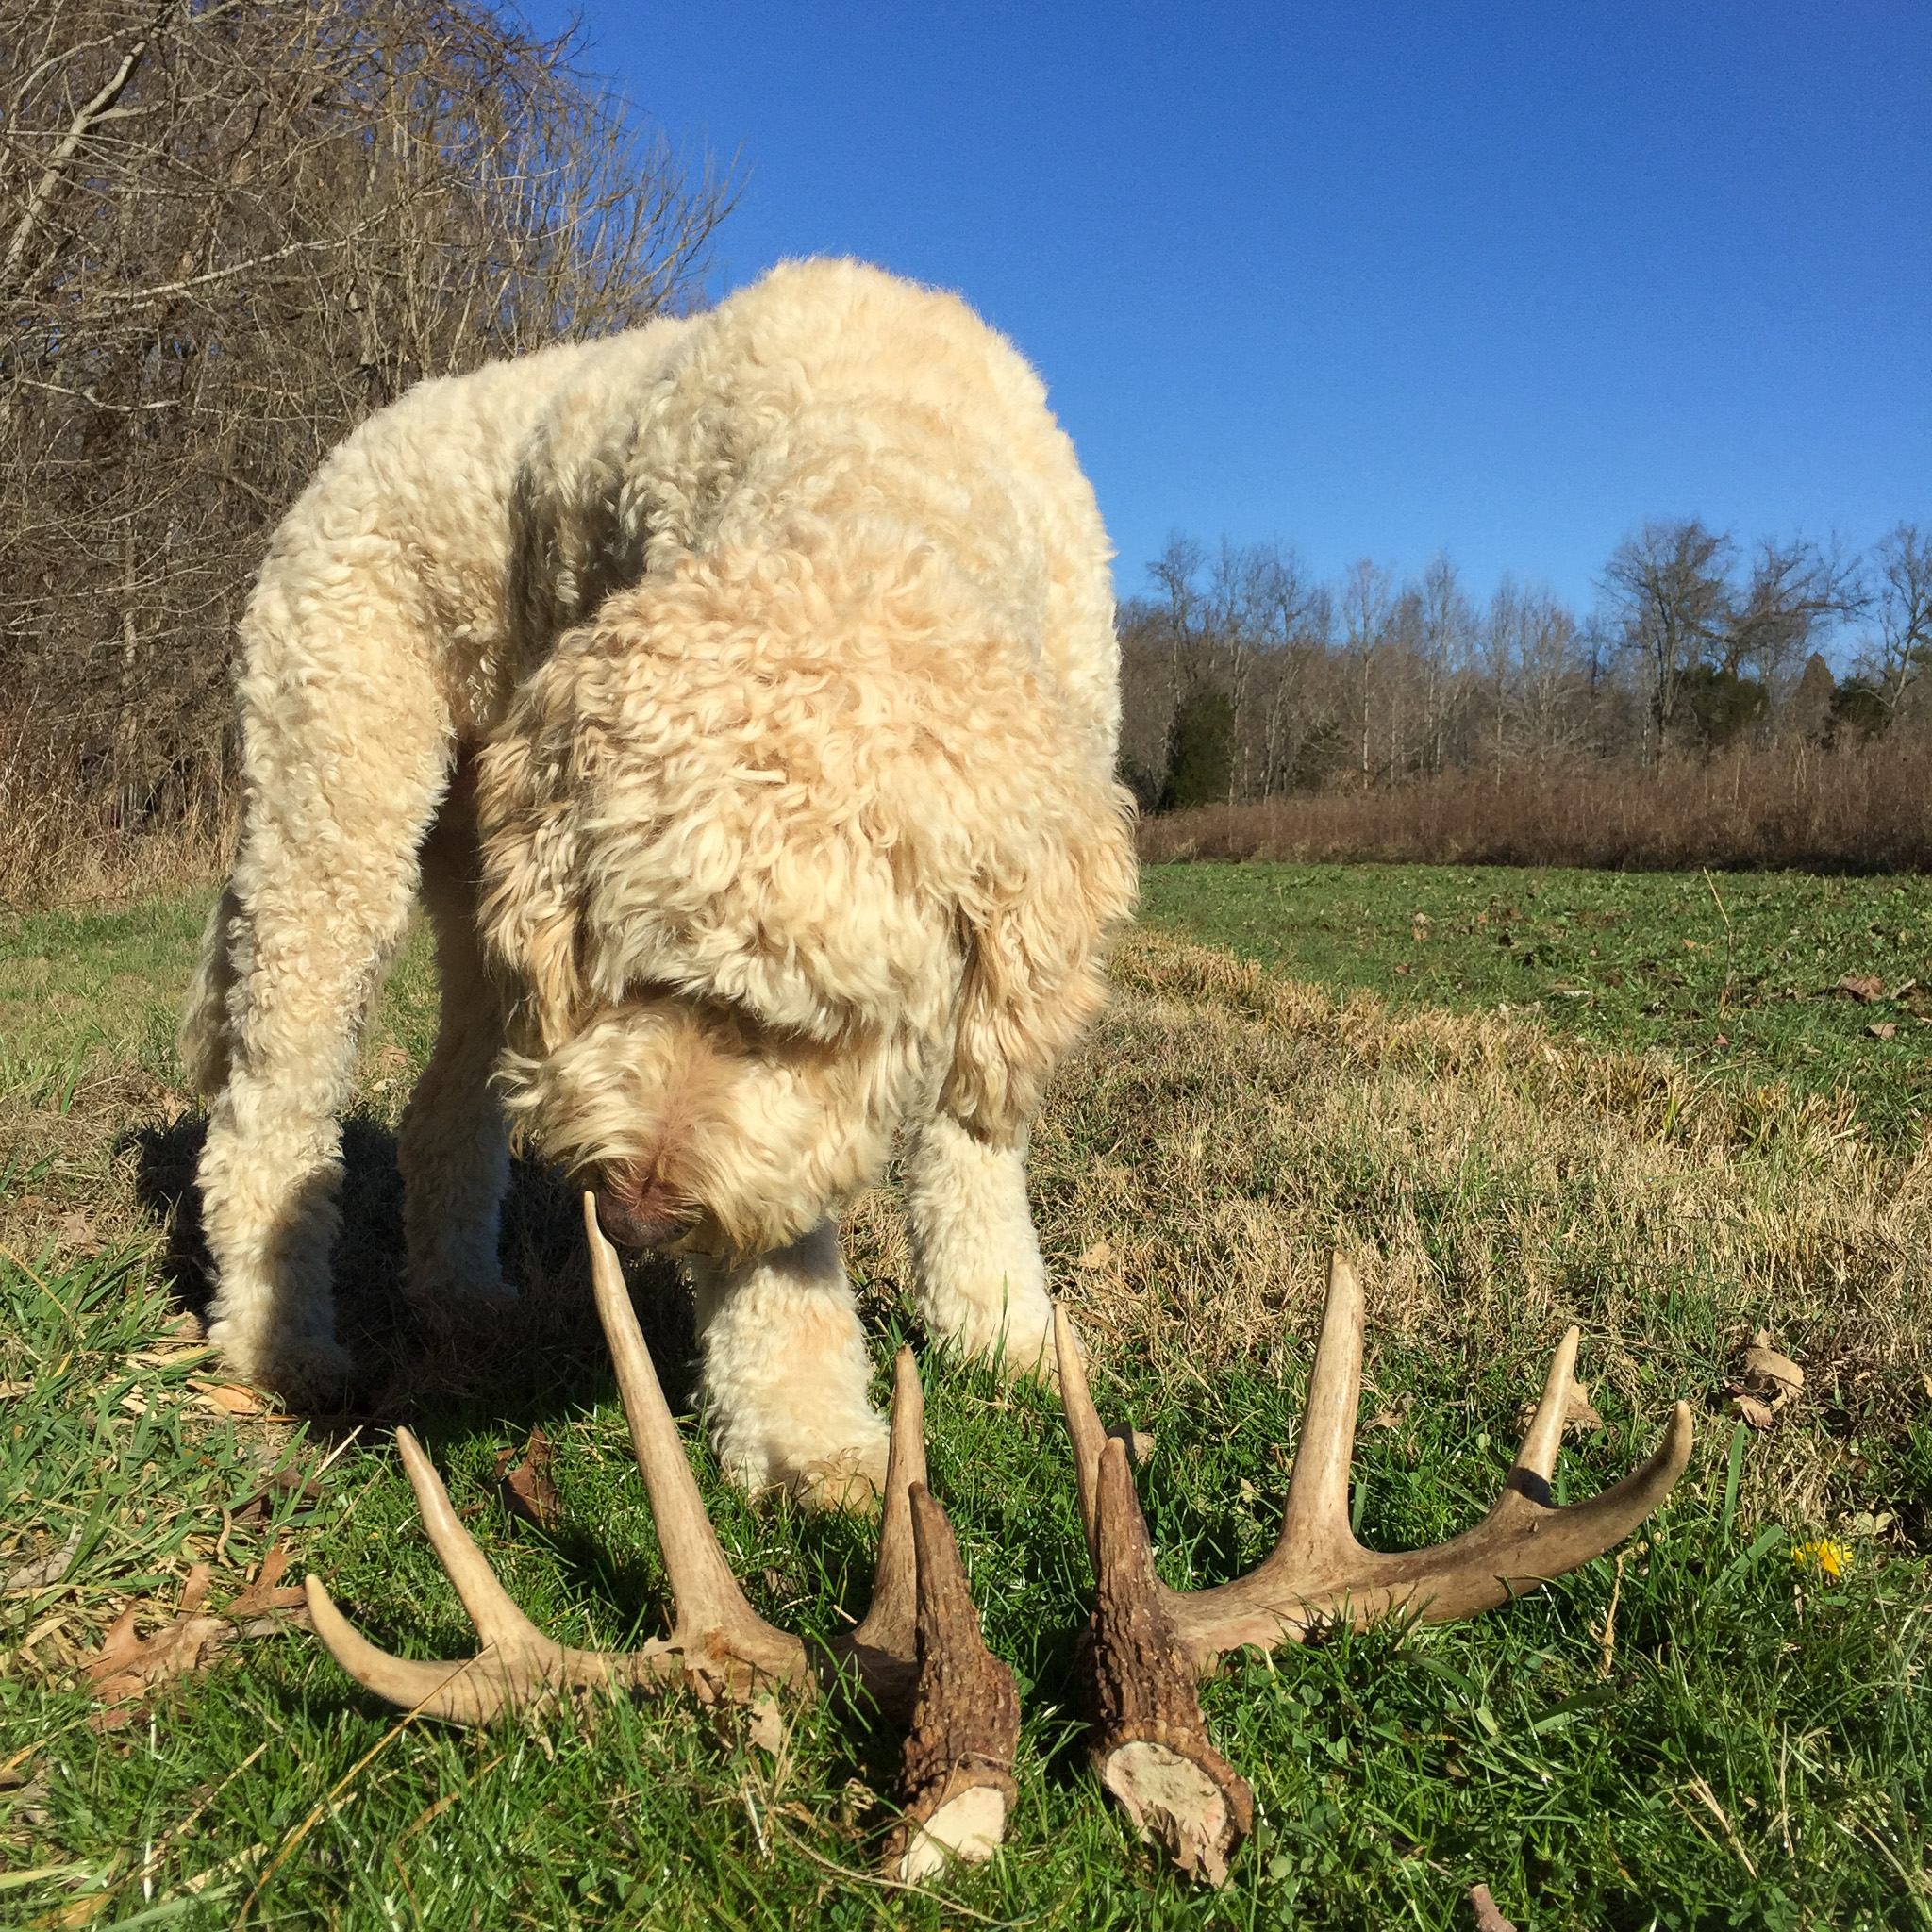 A golden doodle shed hunter with a nice matching set of antlers.